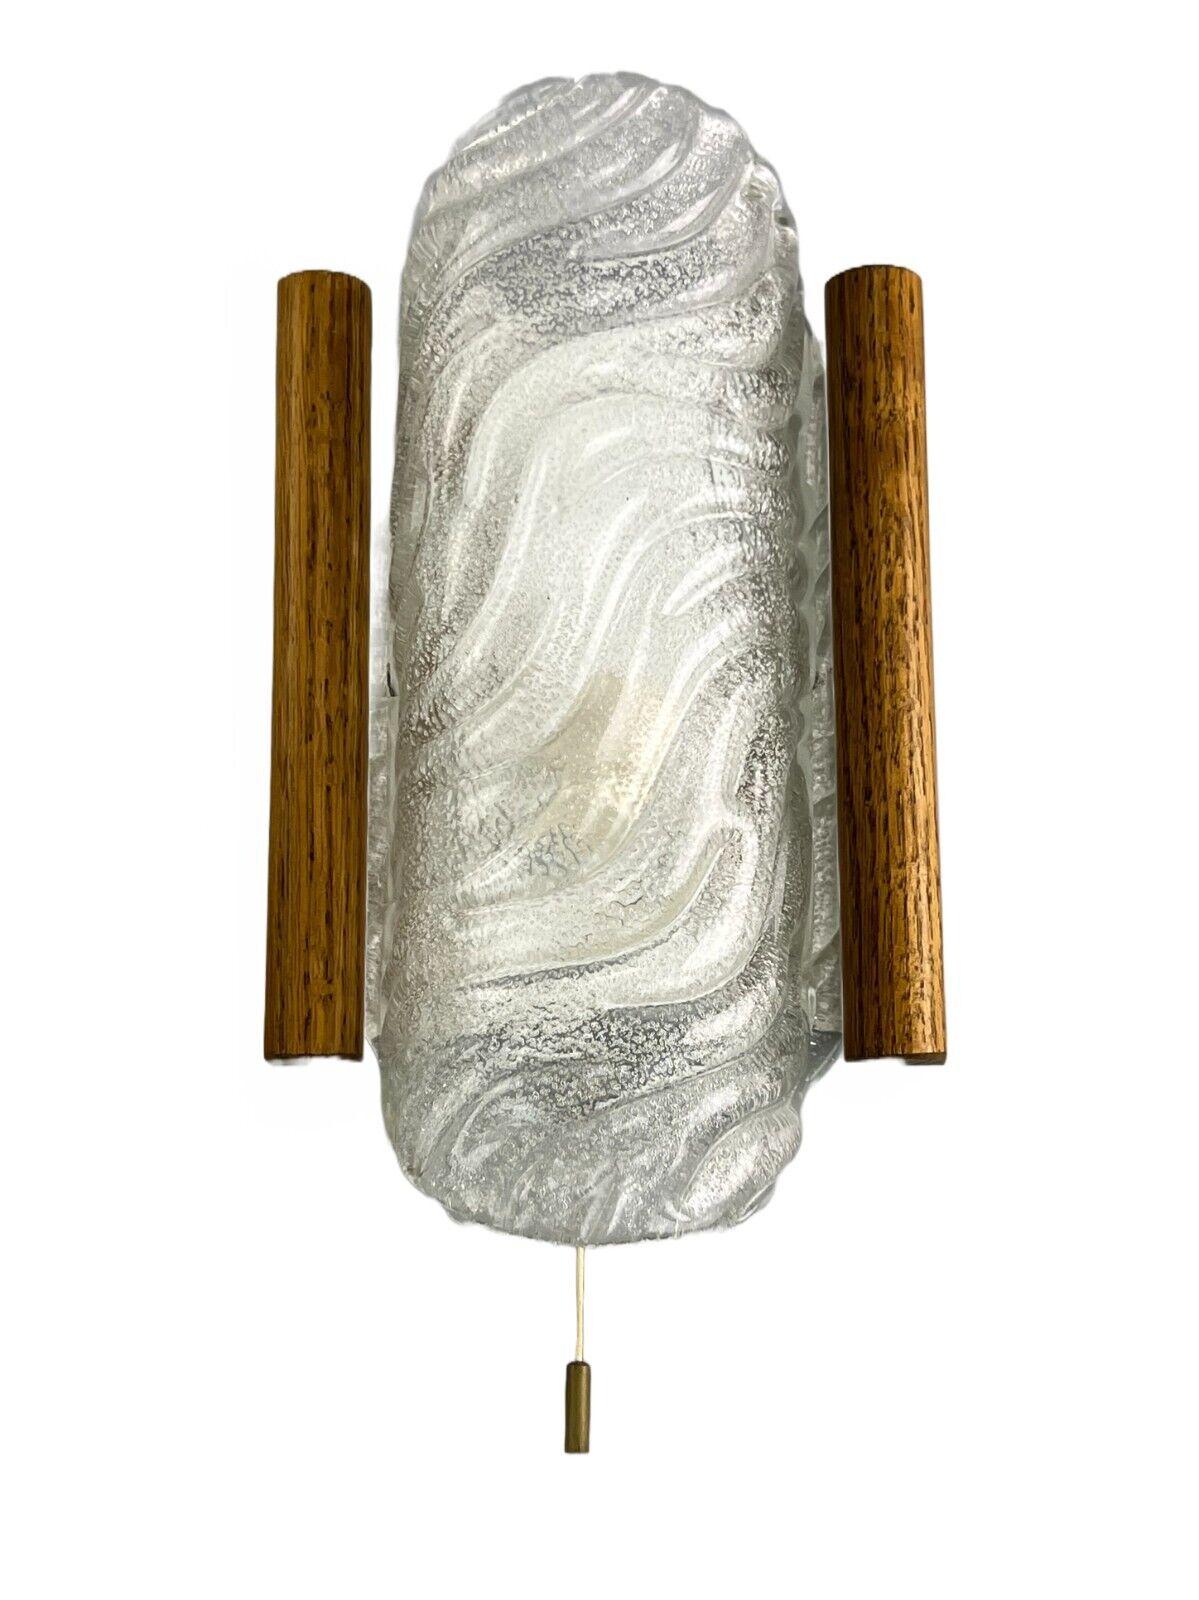 60s 70s lamp light wall lamp wall sconce ice glass space age design

Object: wall lamp

Manufacturer: Fischer lights

Condition: good

Age: around 1960-1970

Dimensions:

Height = 28.5cm
Width = 17cm
Depth = 7cm

Other notes:

E14